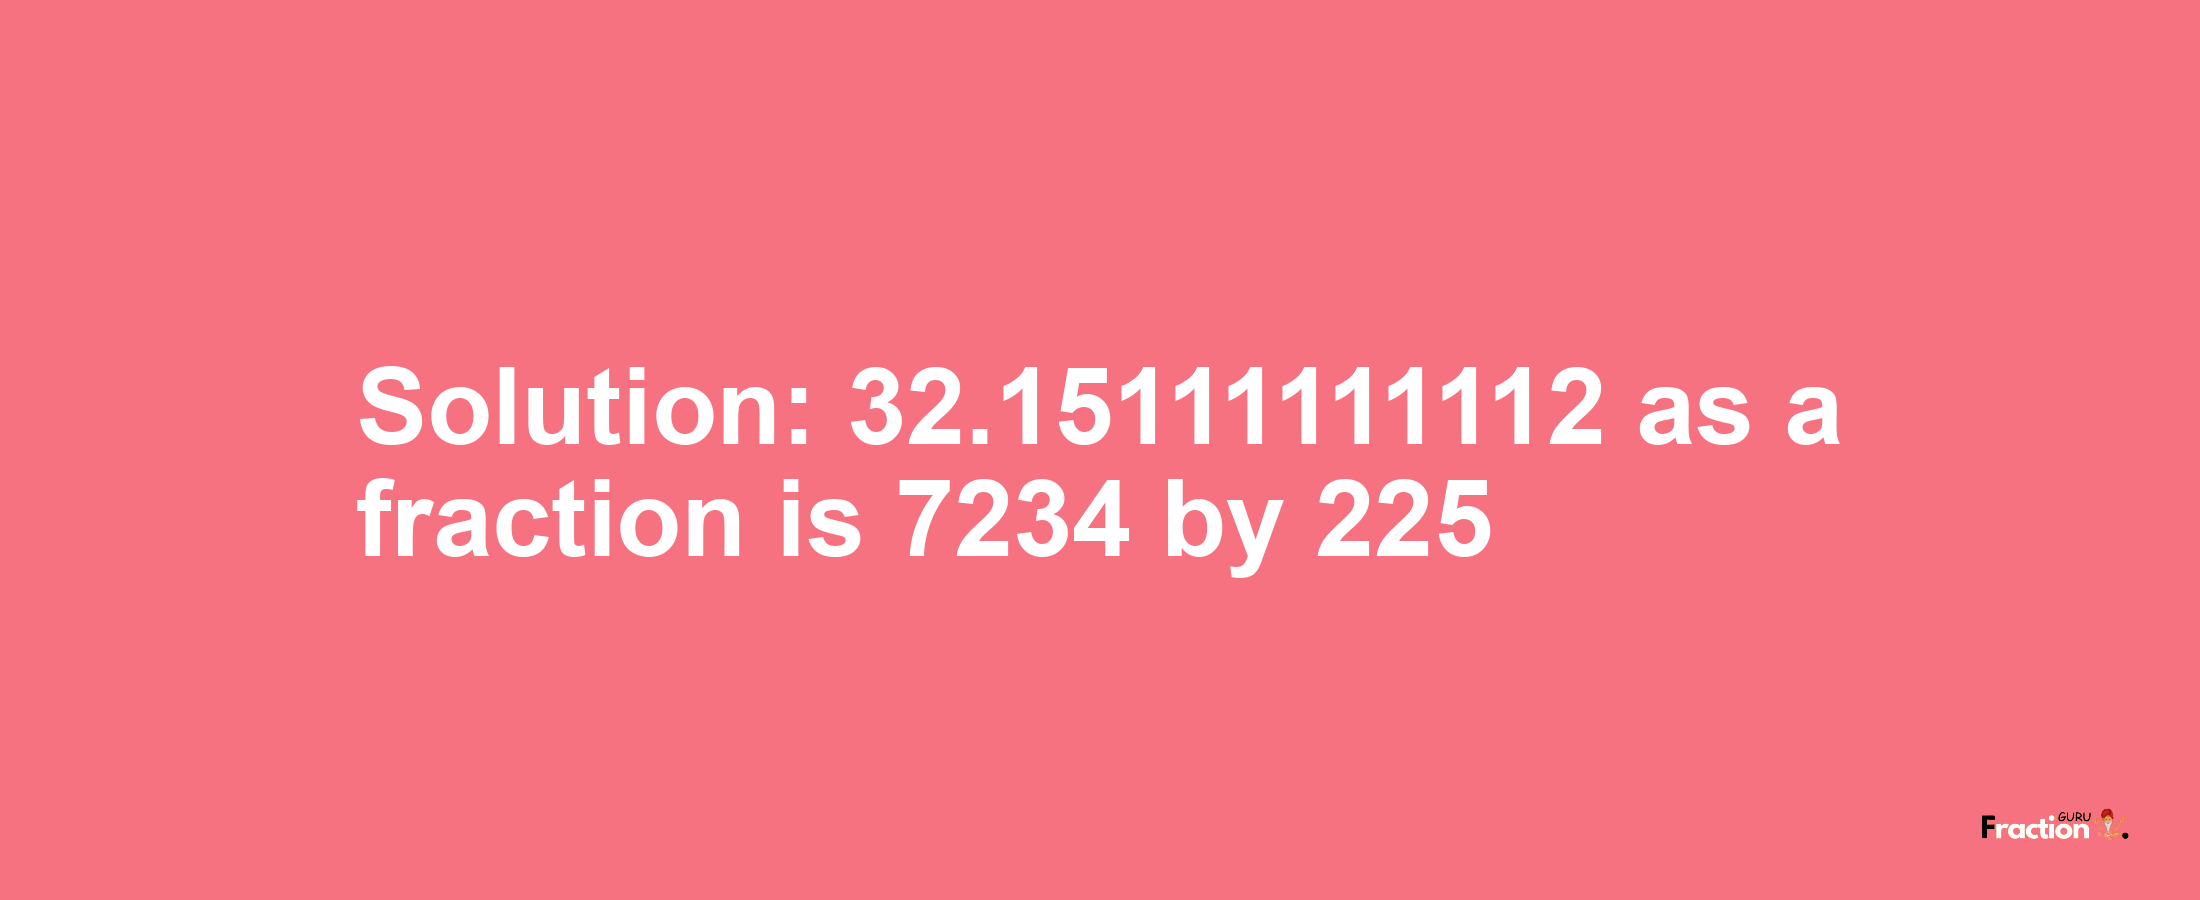 Solution:32.15111111112 as a fraction is 7234/225